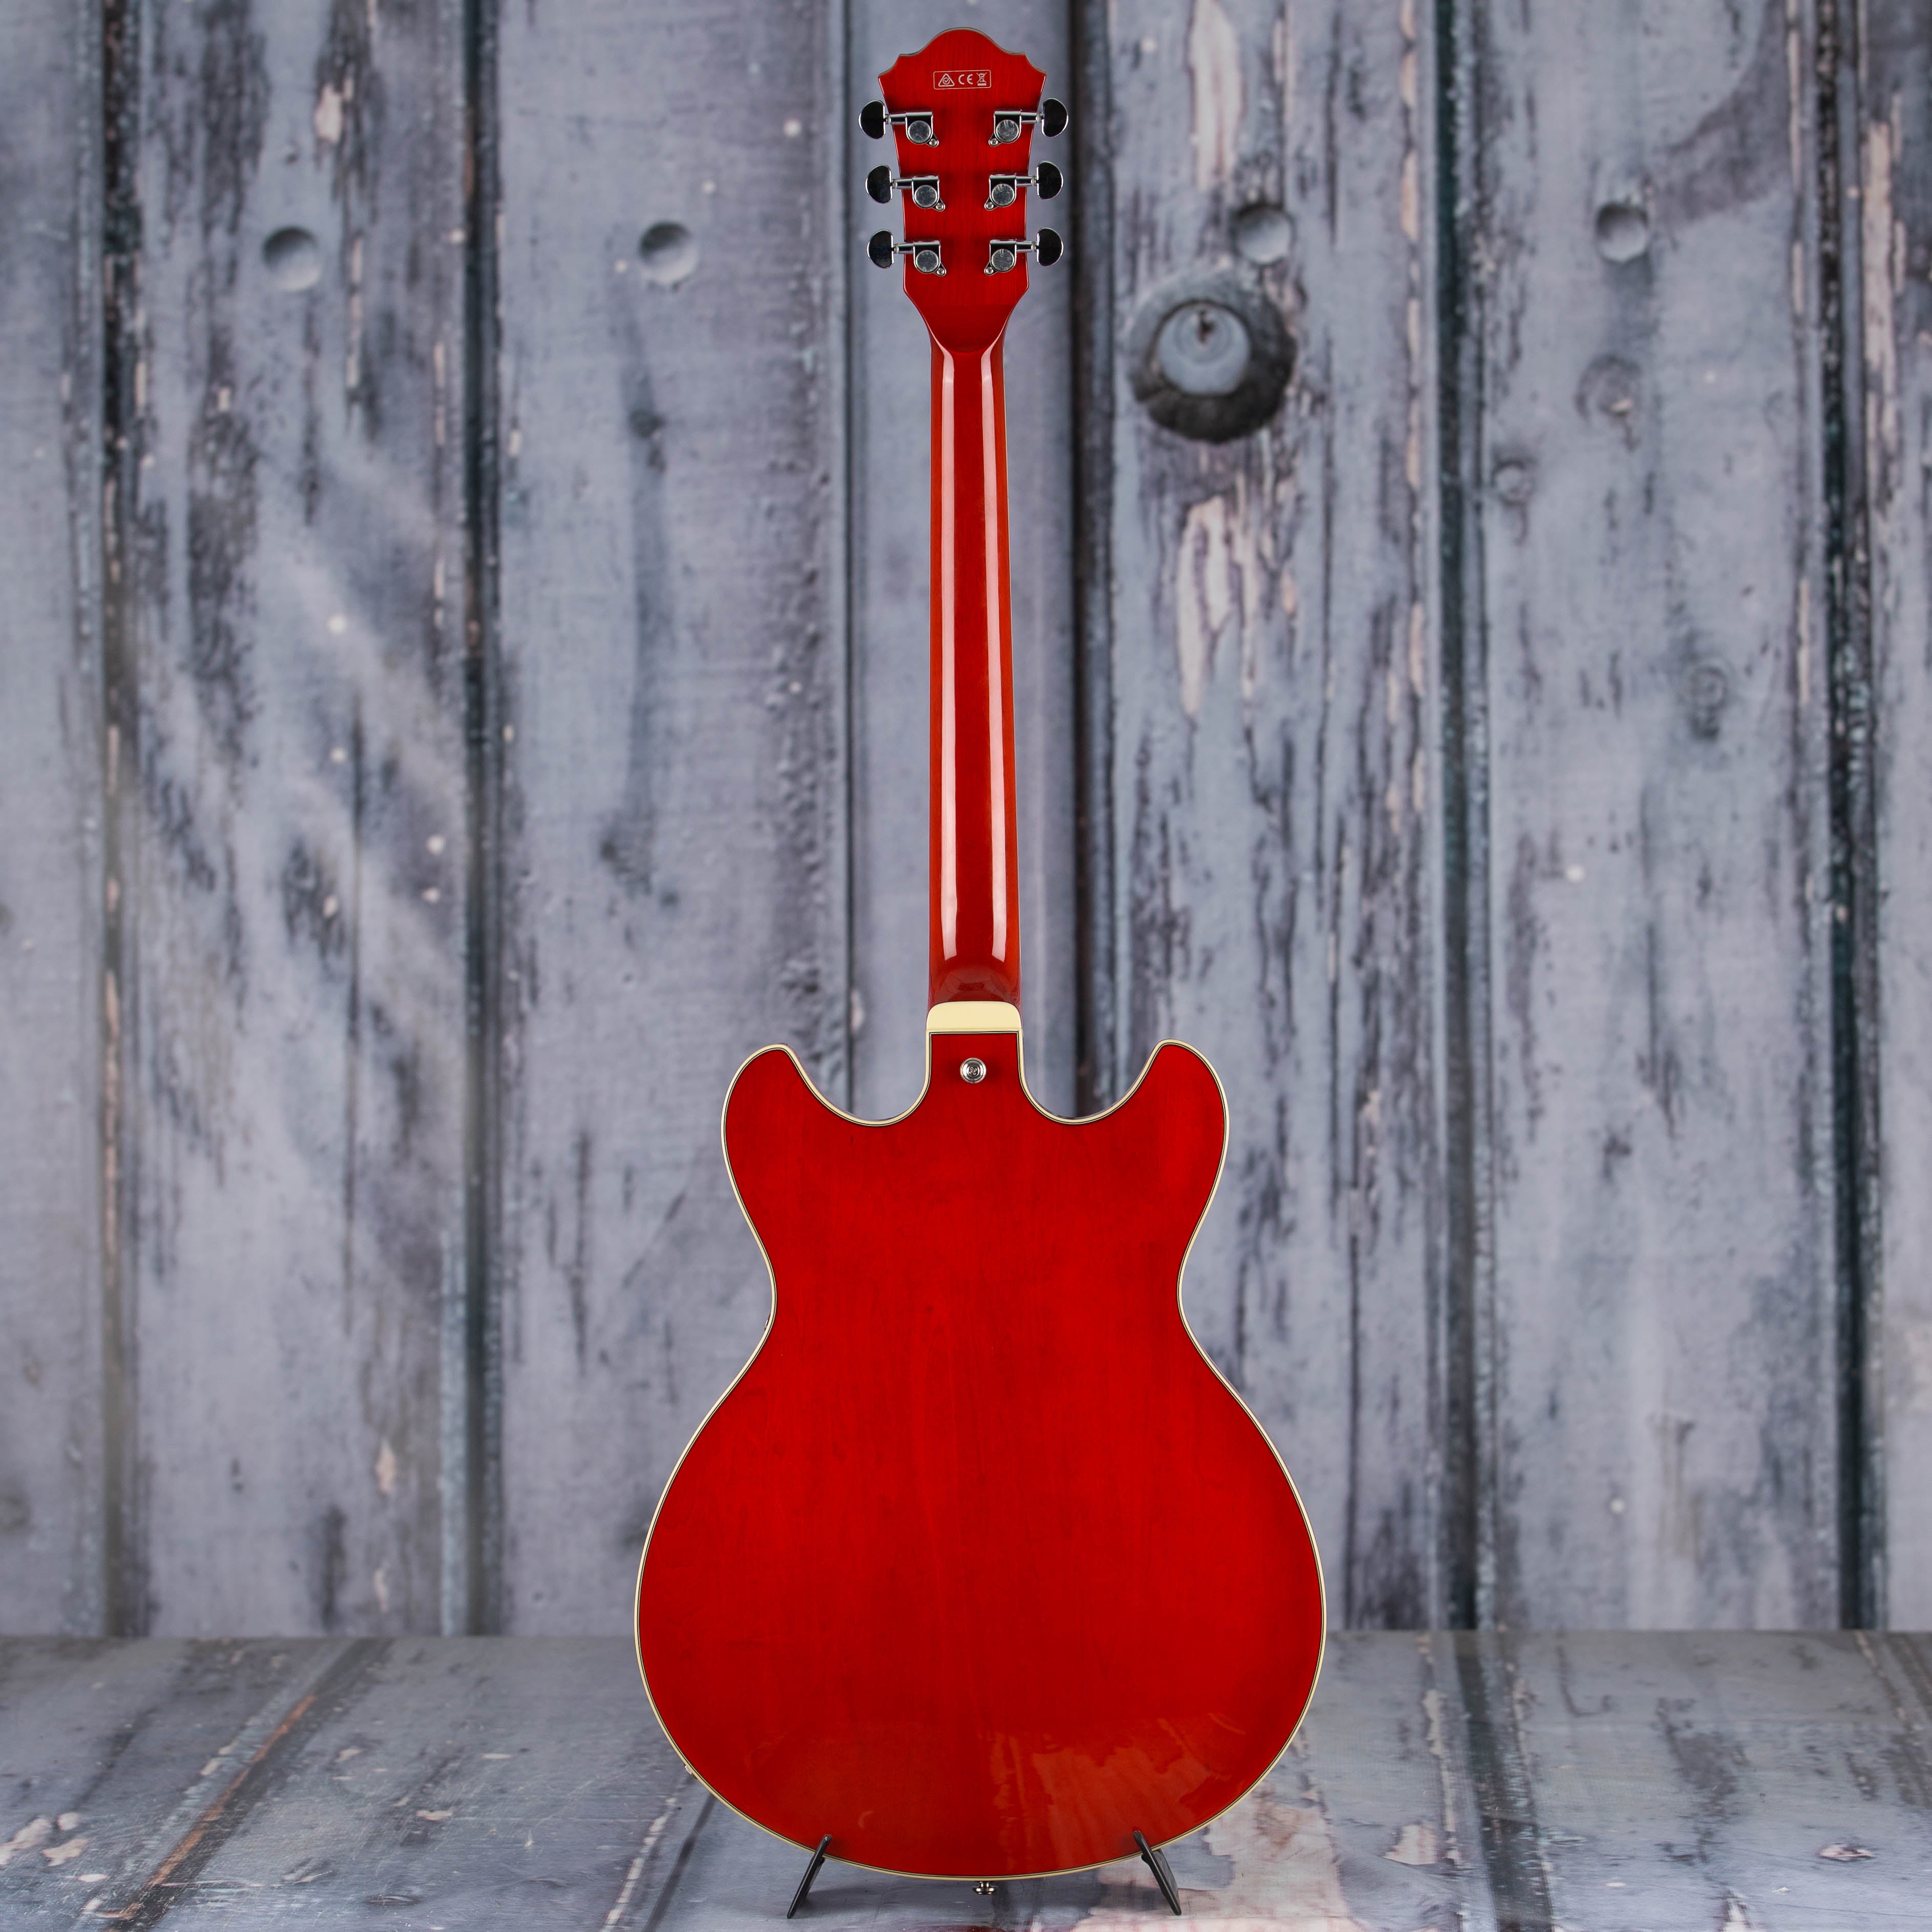 Ibanez AS73 Transparent Cherry Red | For Sale | Replay Guitar Exchange